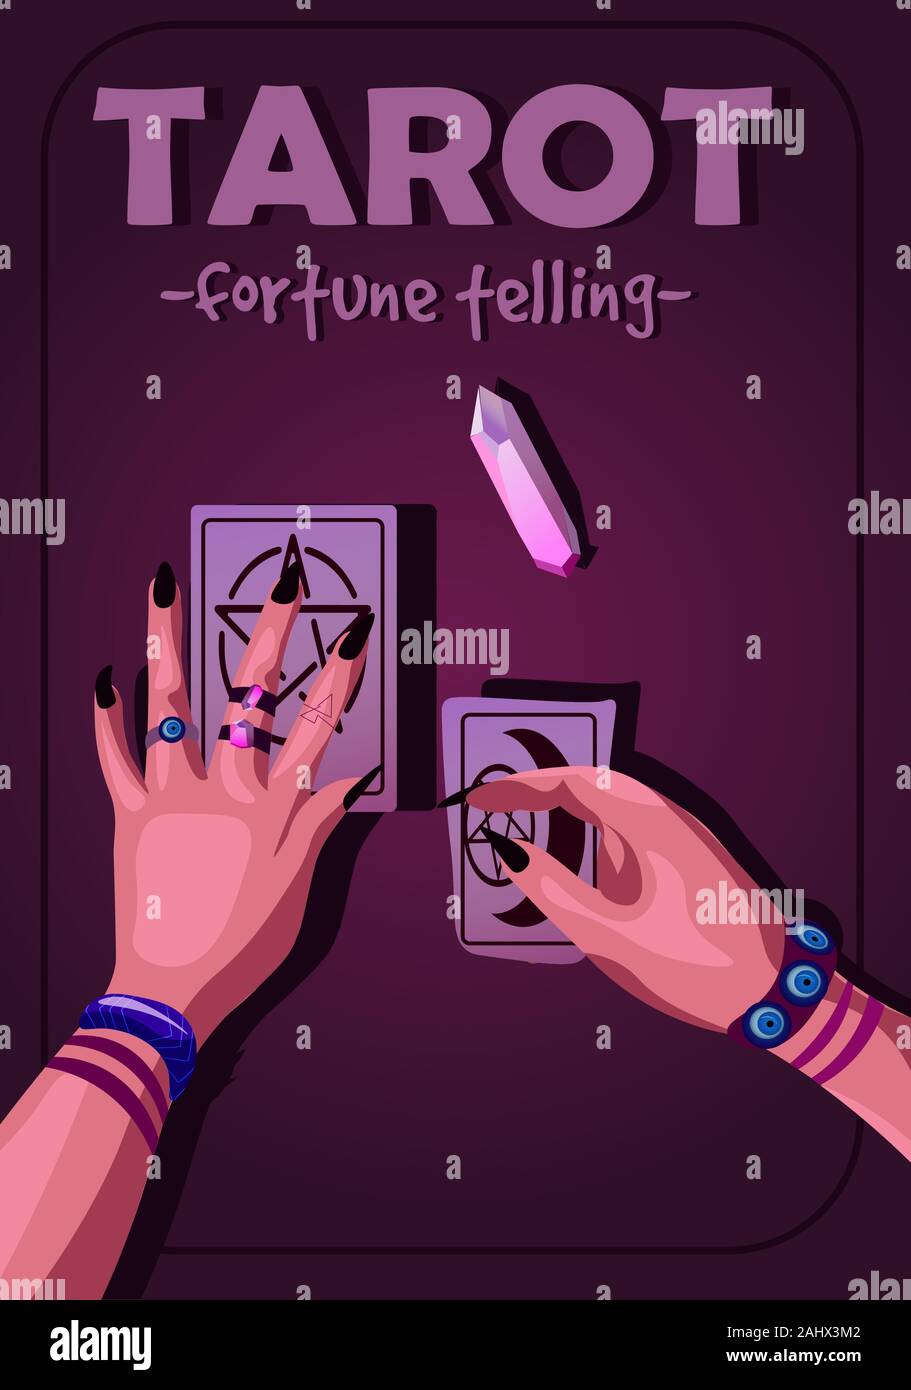 Tarot reading poster with purple violet lighting and text. Fortune telling, witch hands holding two cards in her hands illustration. Stock Vector